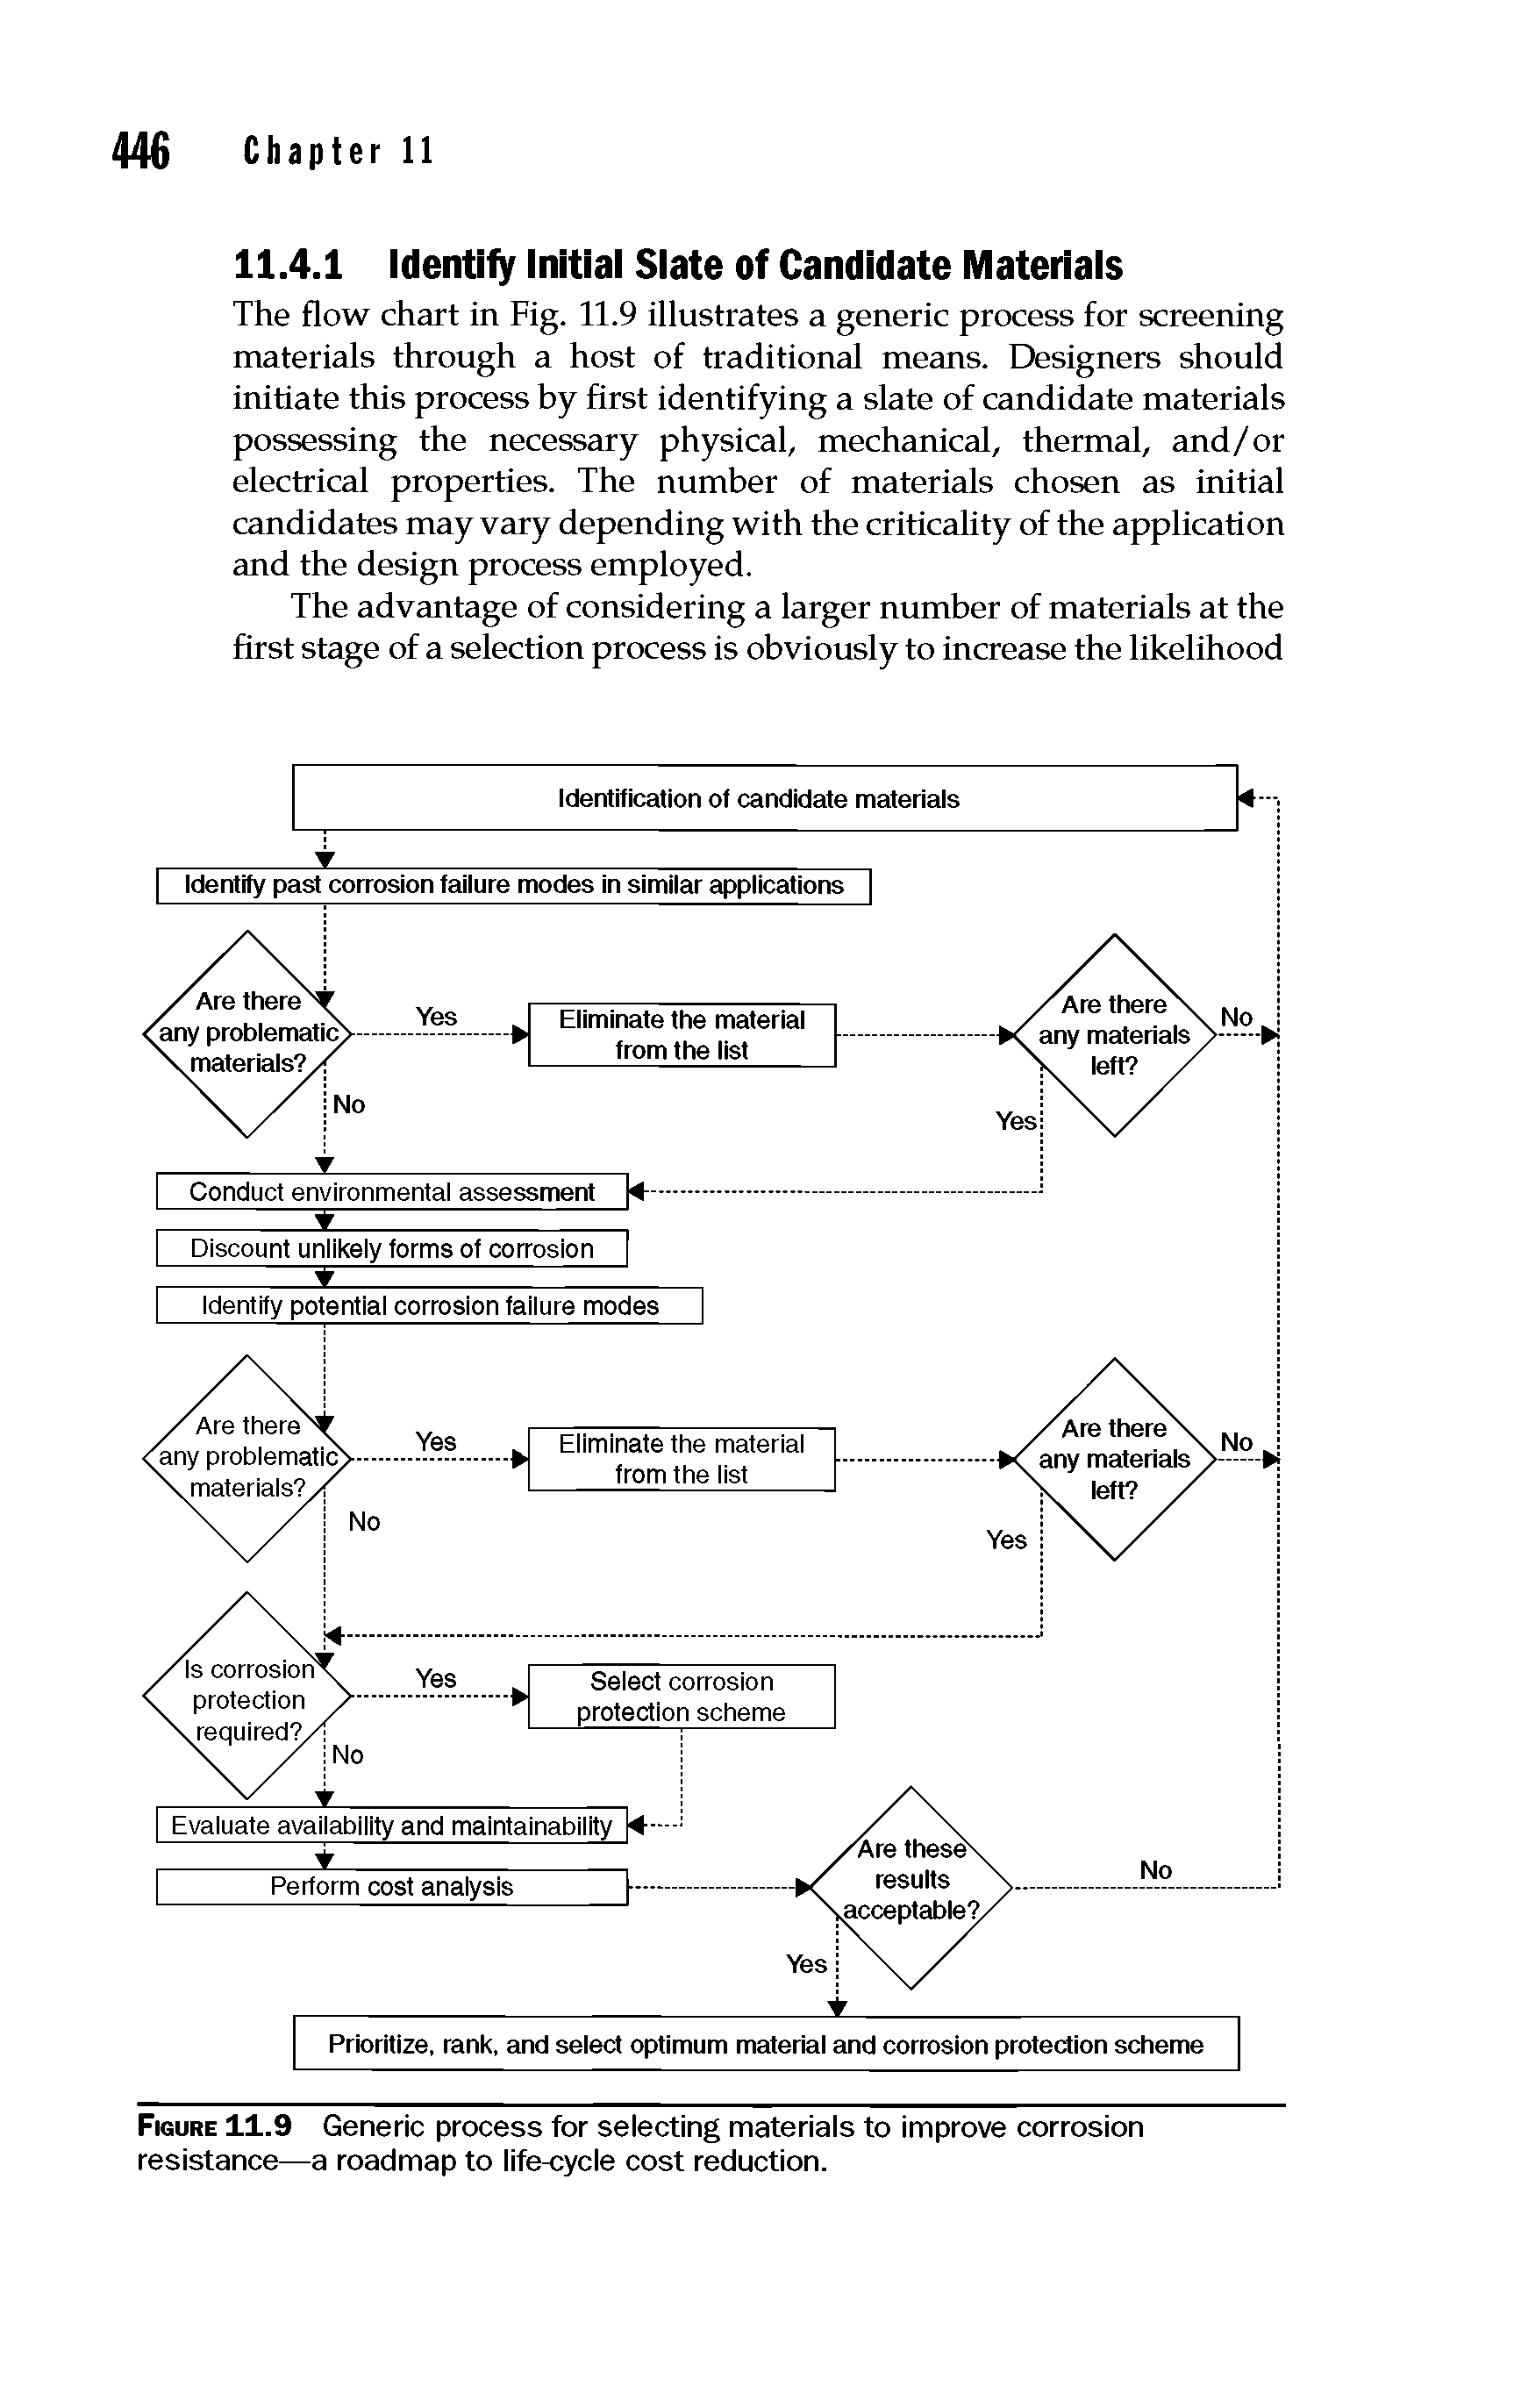 Figure 11.9 Generic process for selecting materials to improve corrosion resistance—a roadmap to life-cycle cost reduction.